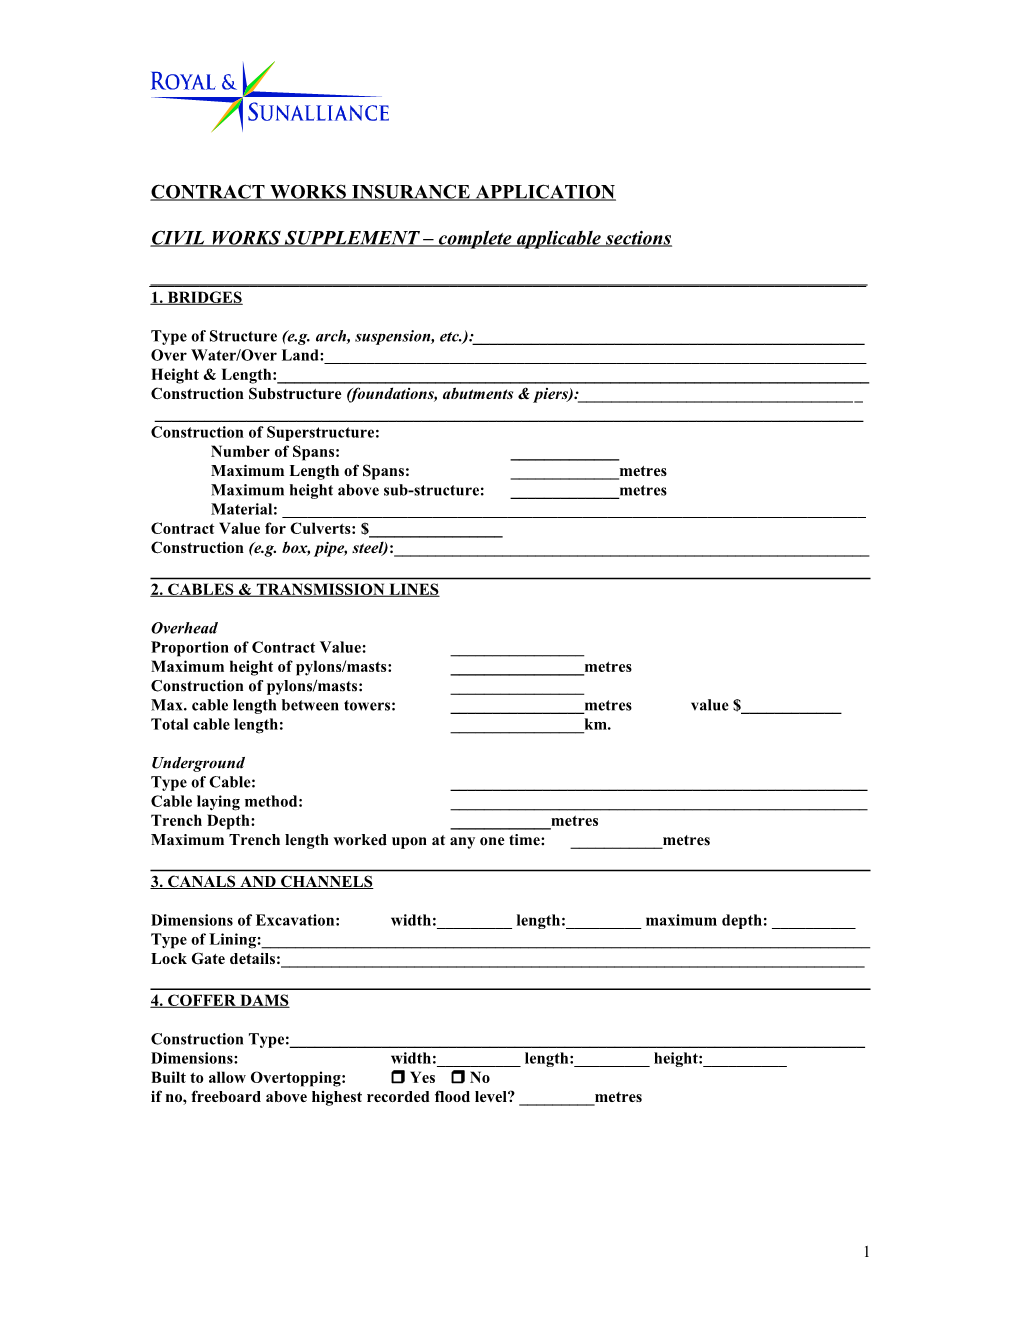 Contract Works Insurance Application